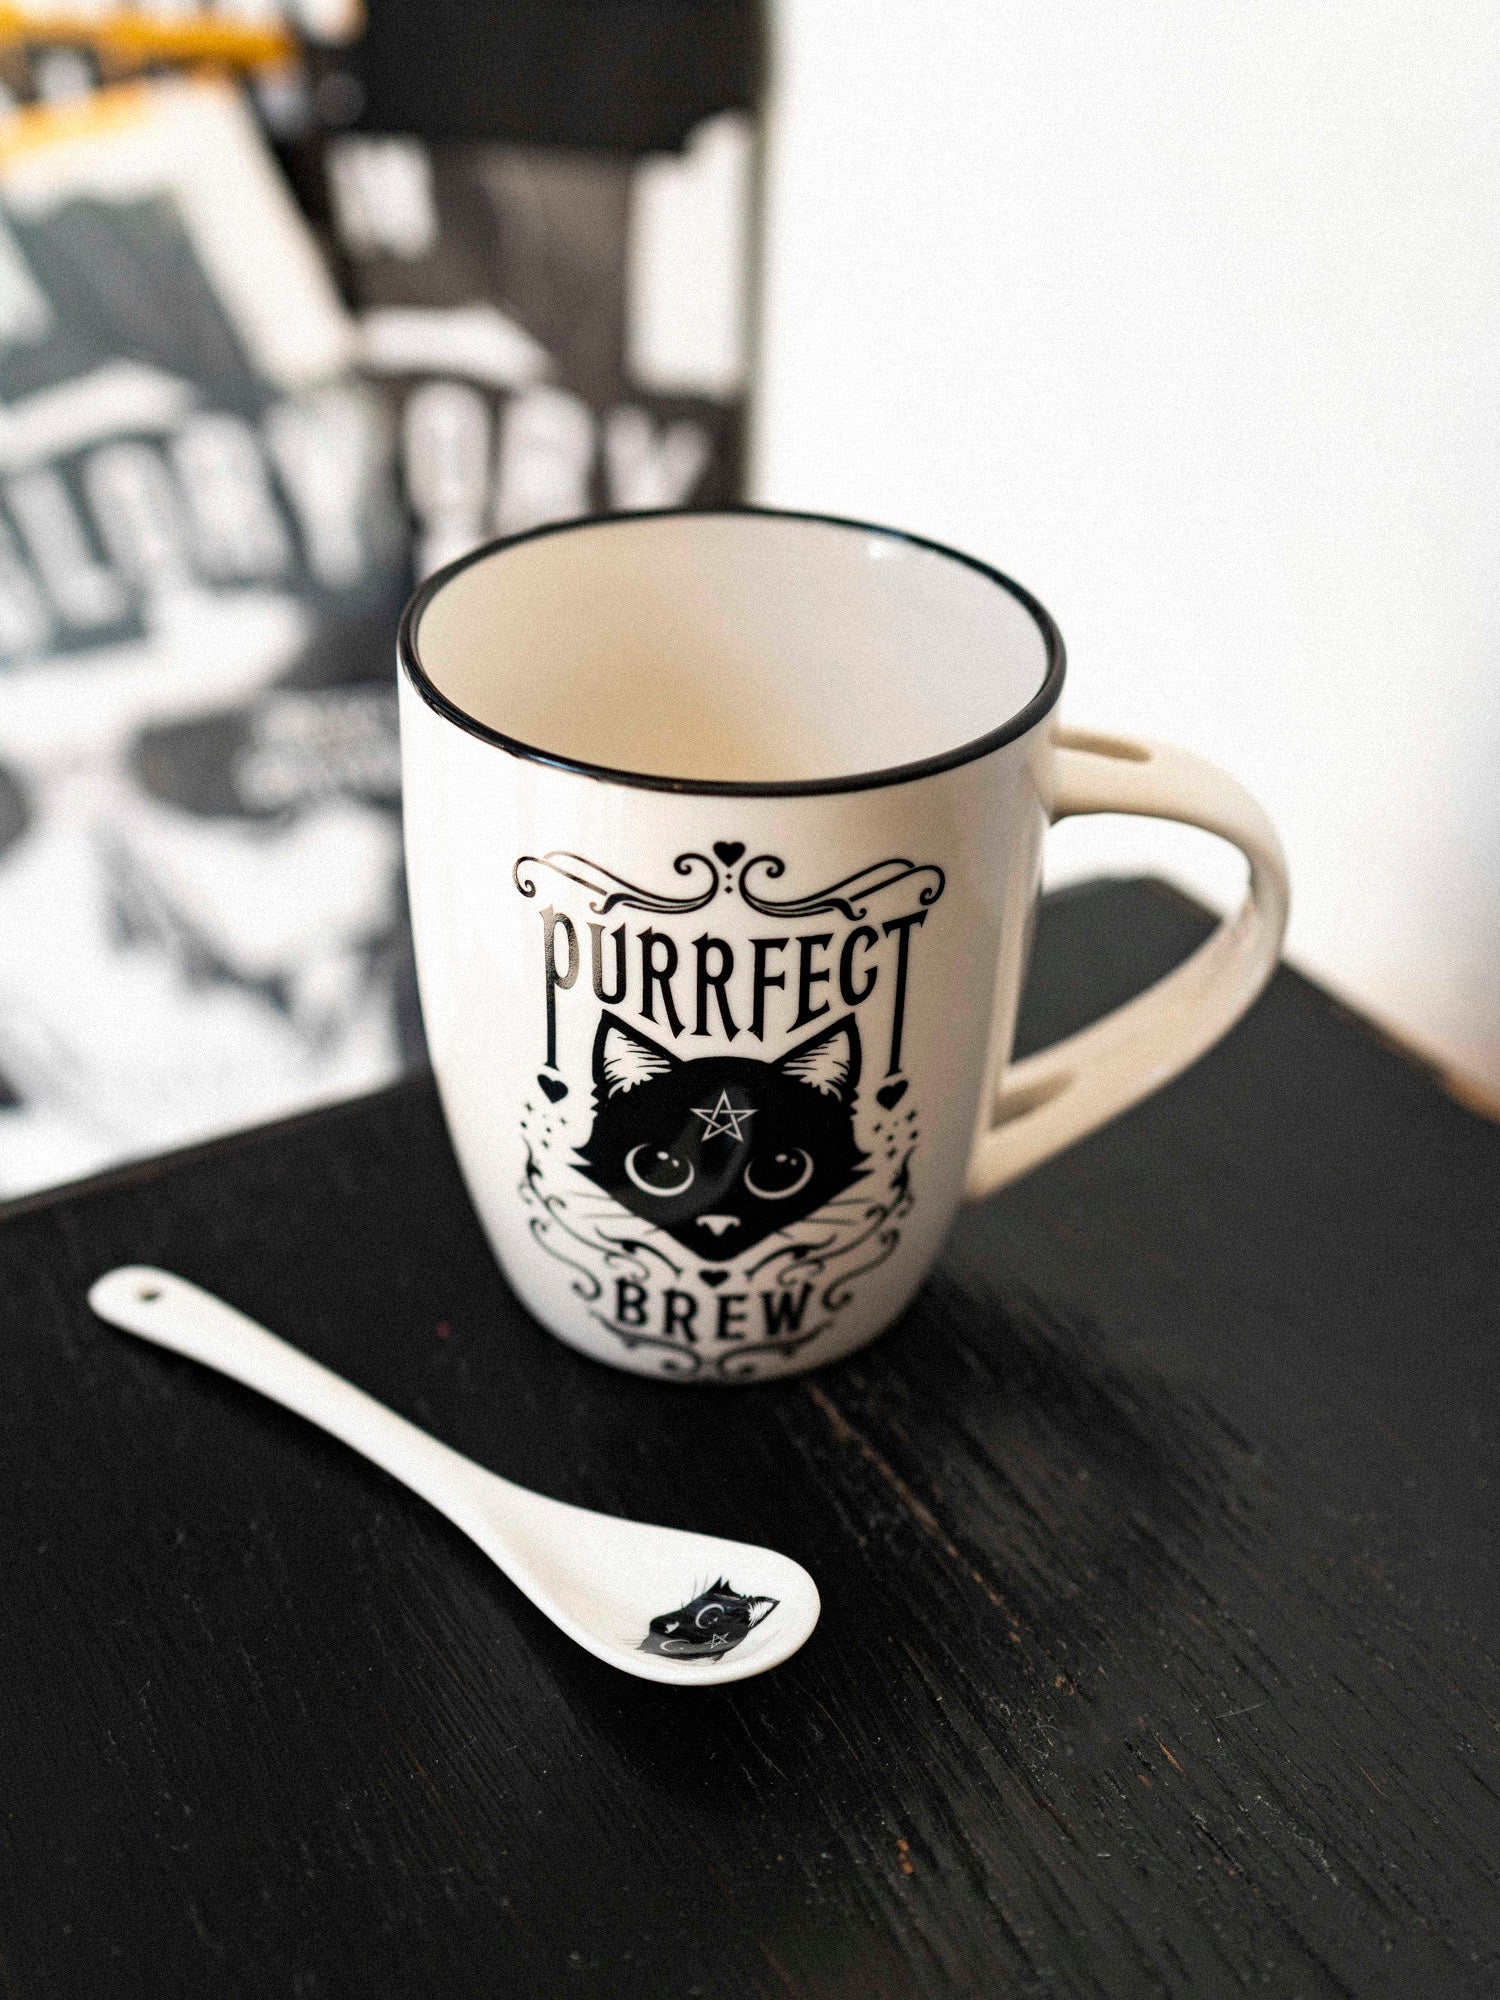 Purrfect Brew Cup & Spoon Set